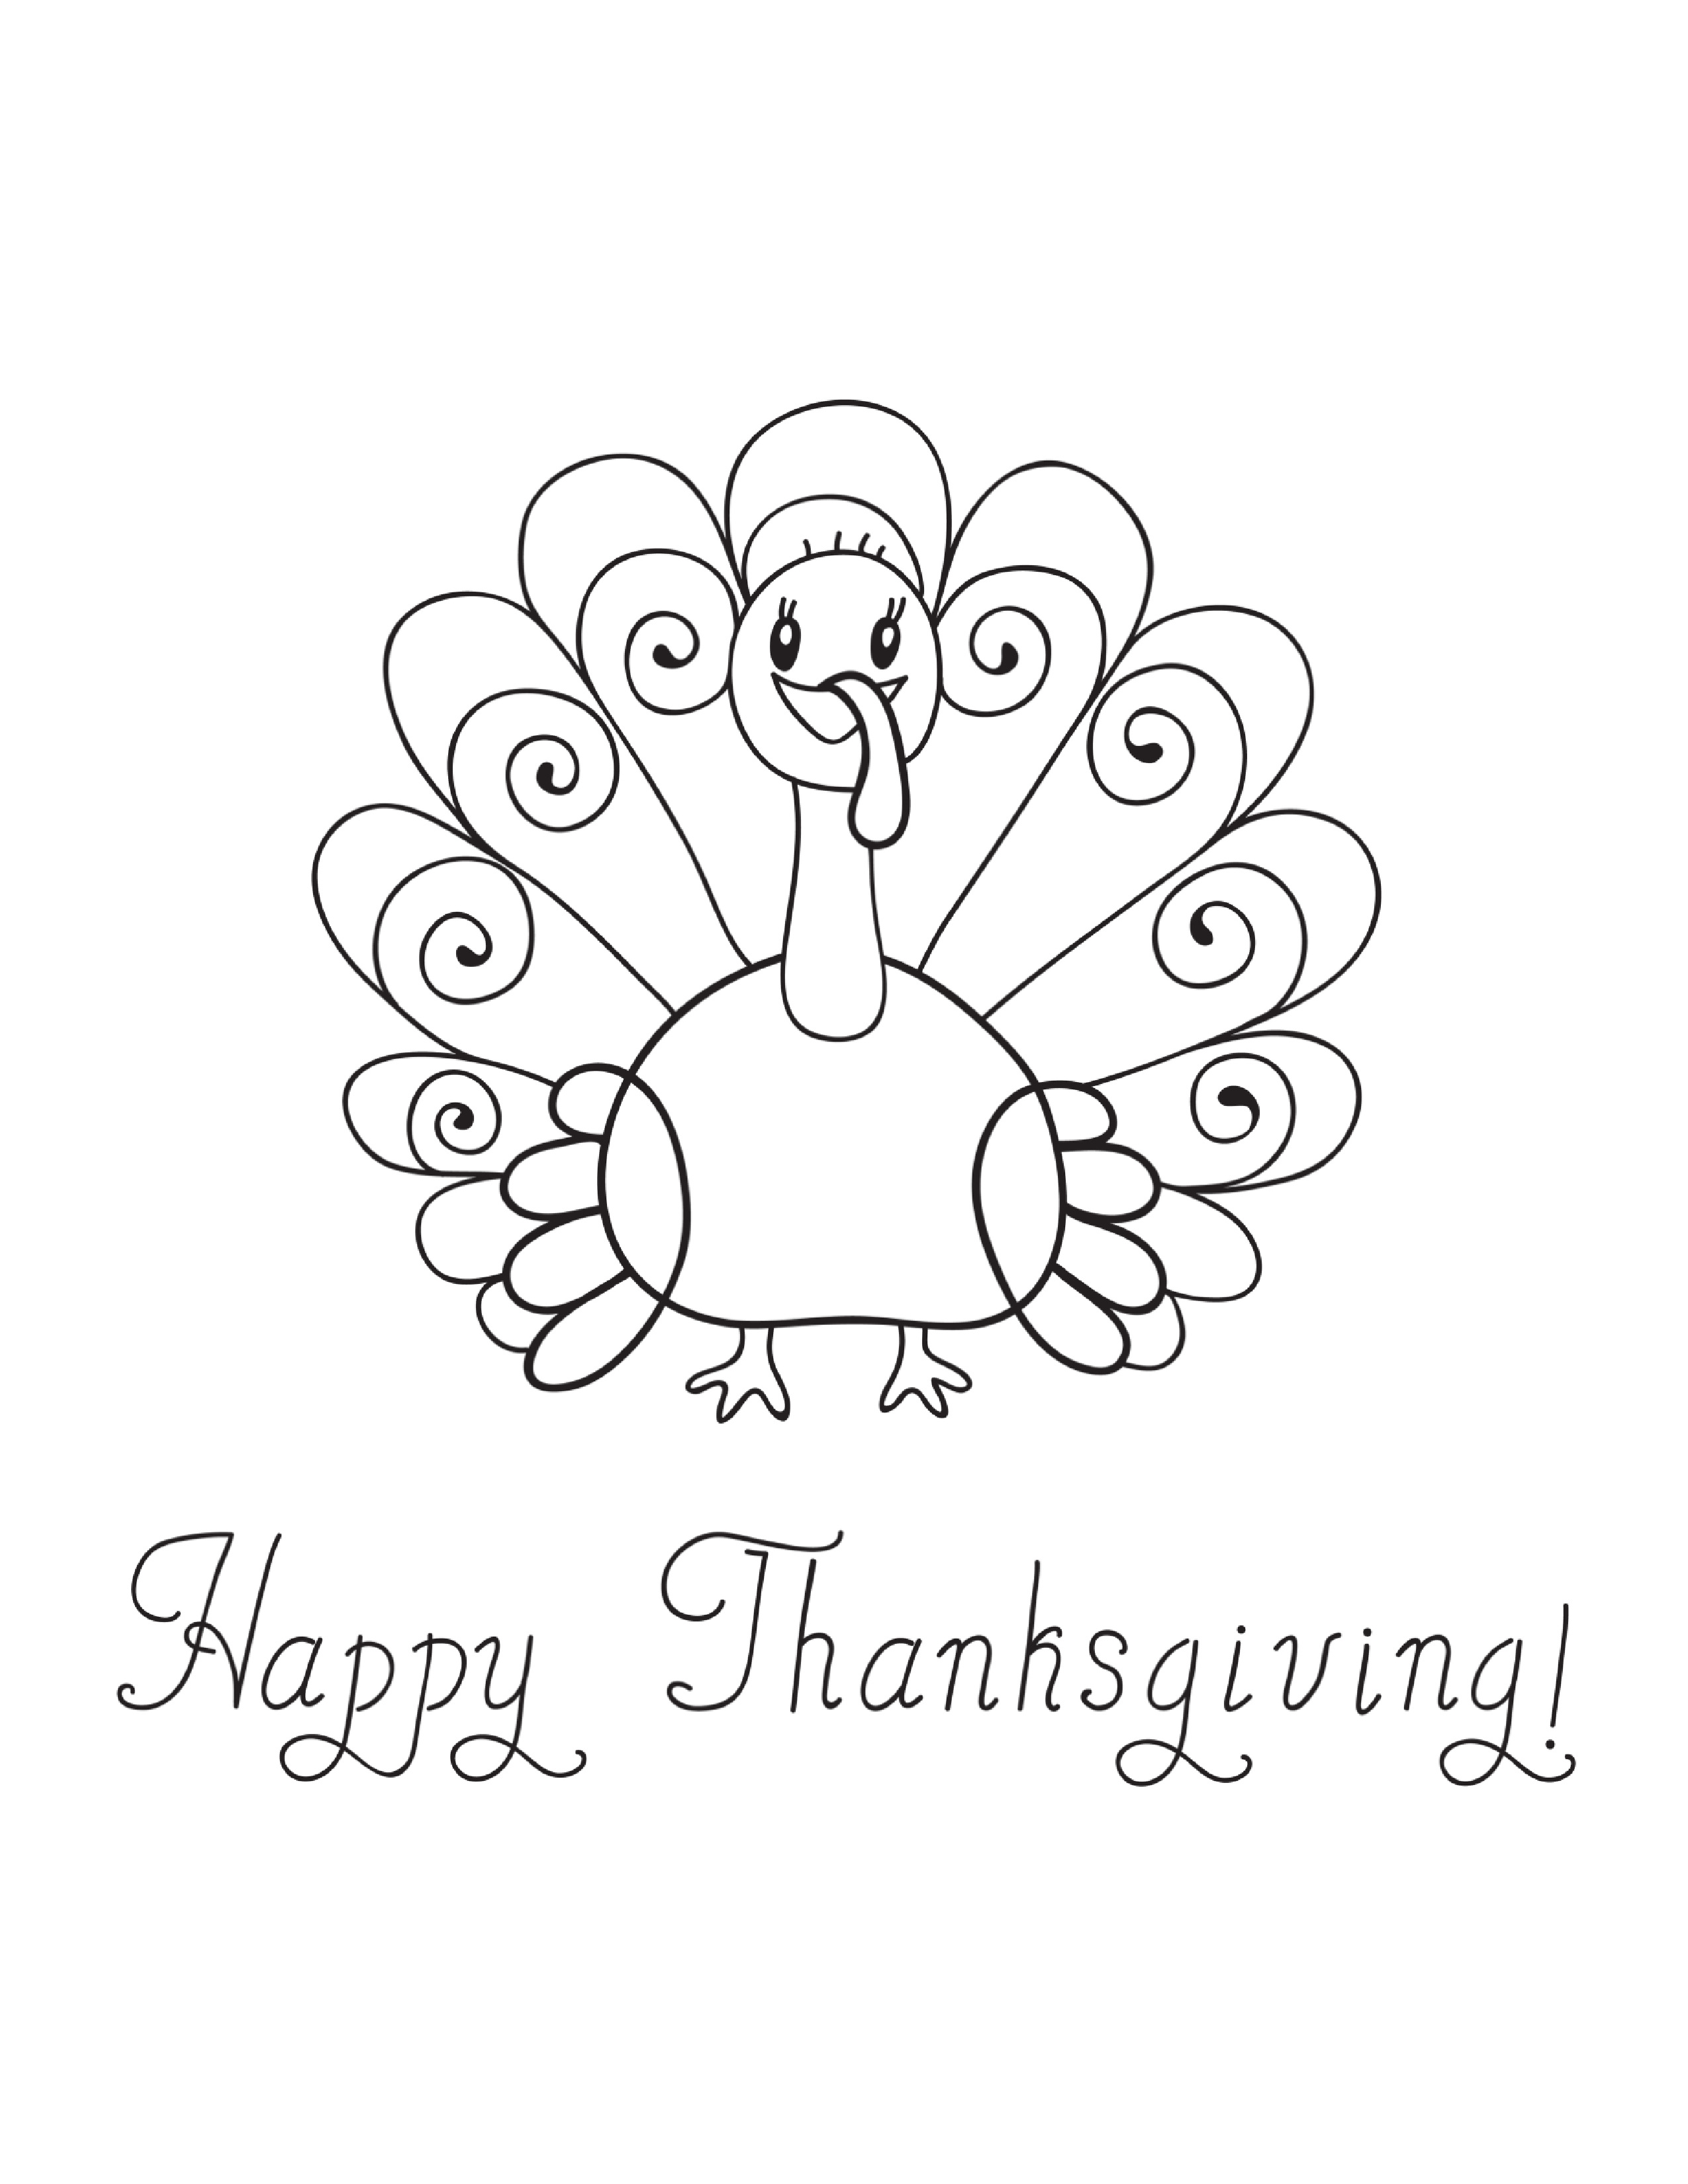 Free Printable Thanksgiving Cards For Coloring